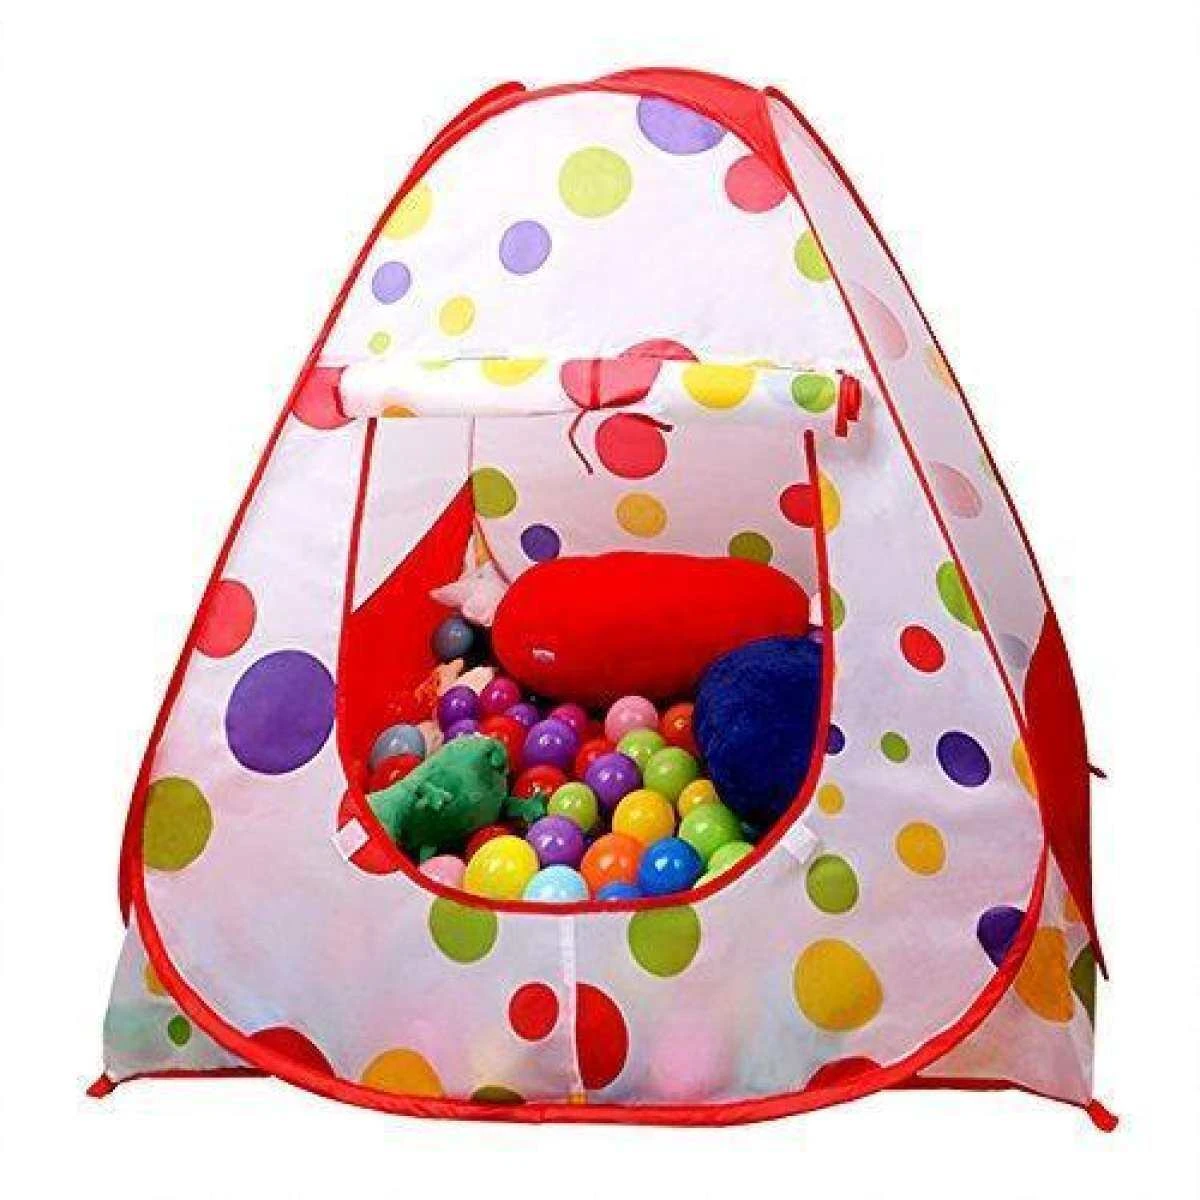 Tent Play House Toy With 50 Ball Set for Kids- Multicolor